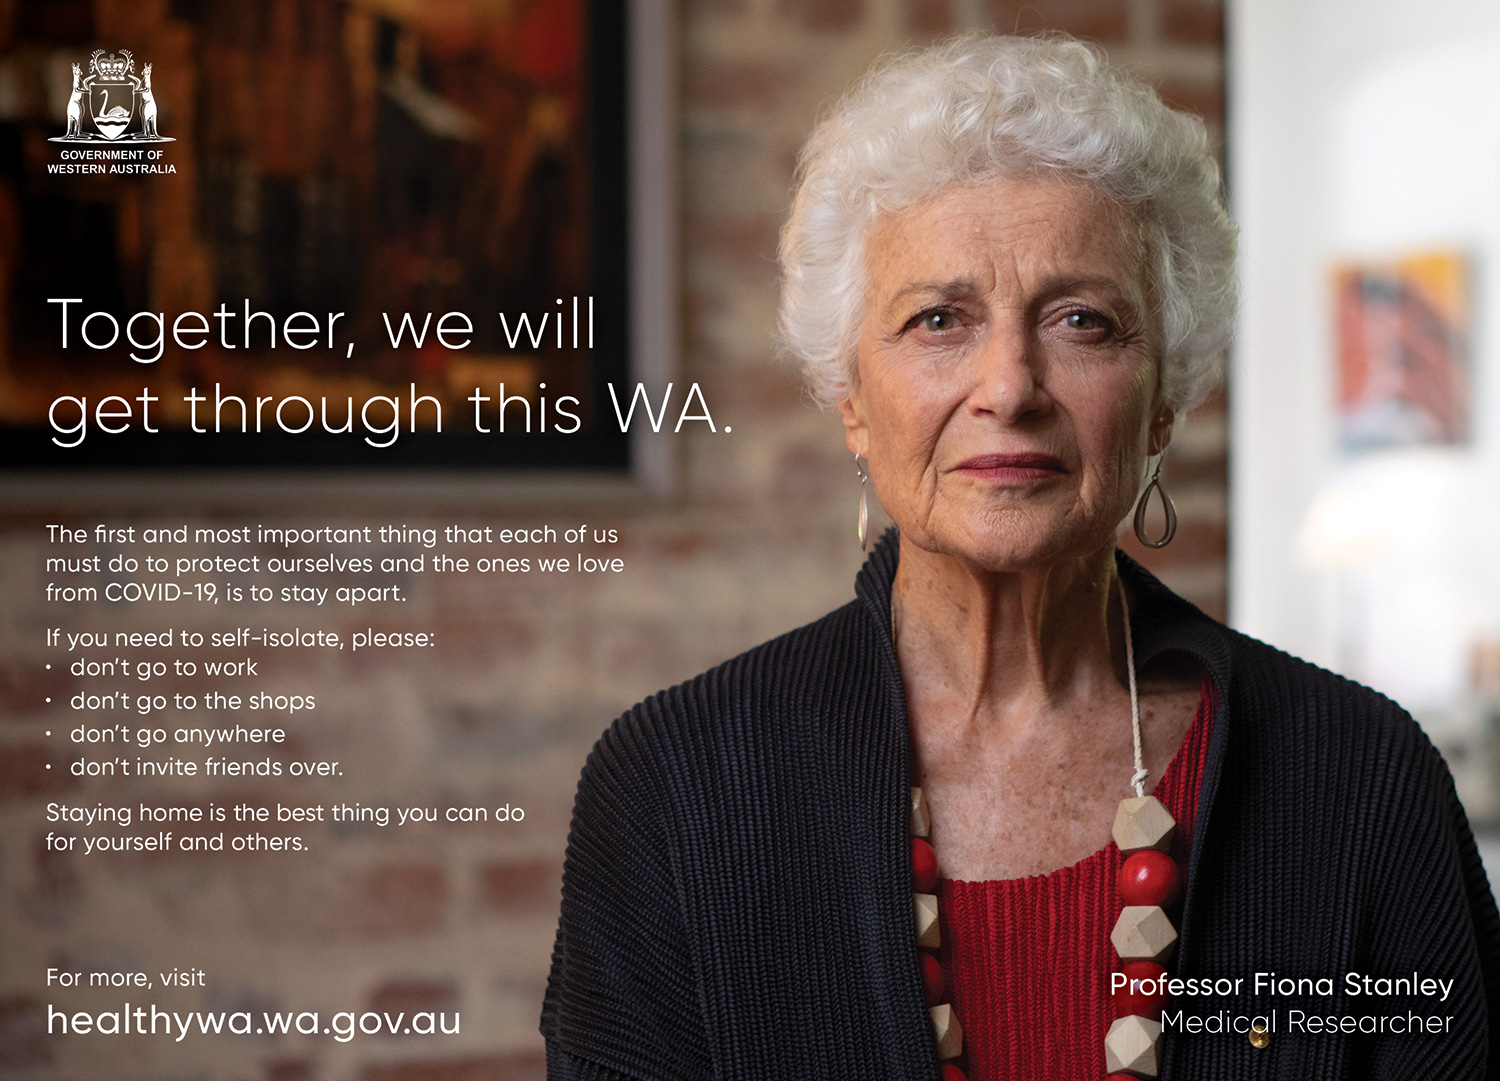 COVID-19 Advert: Together we wil get through this WA